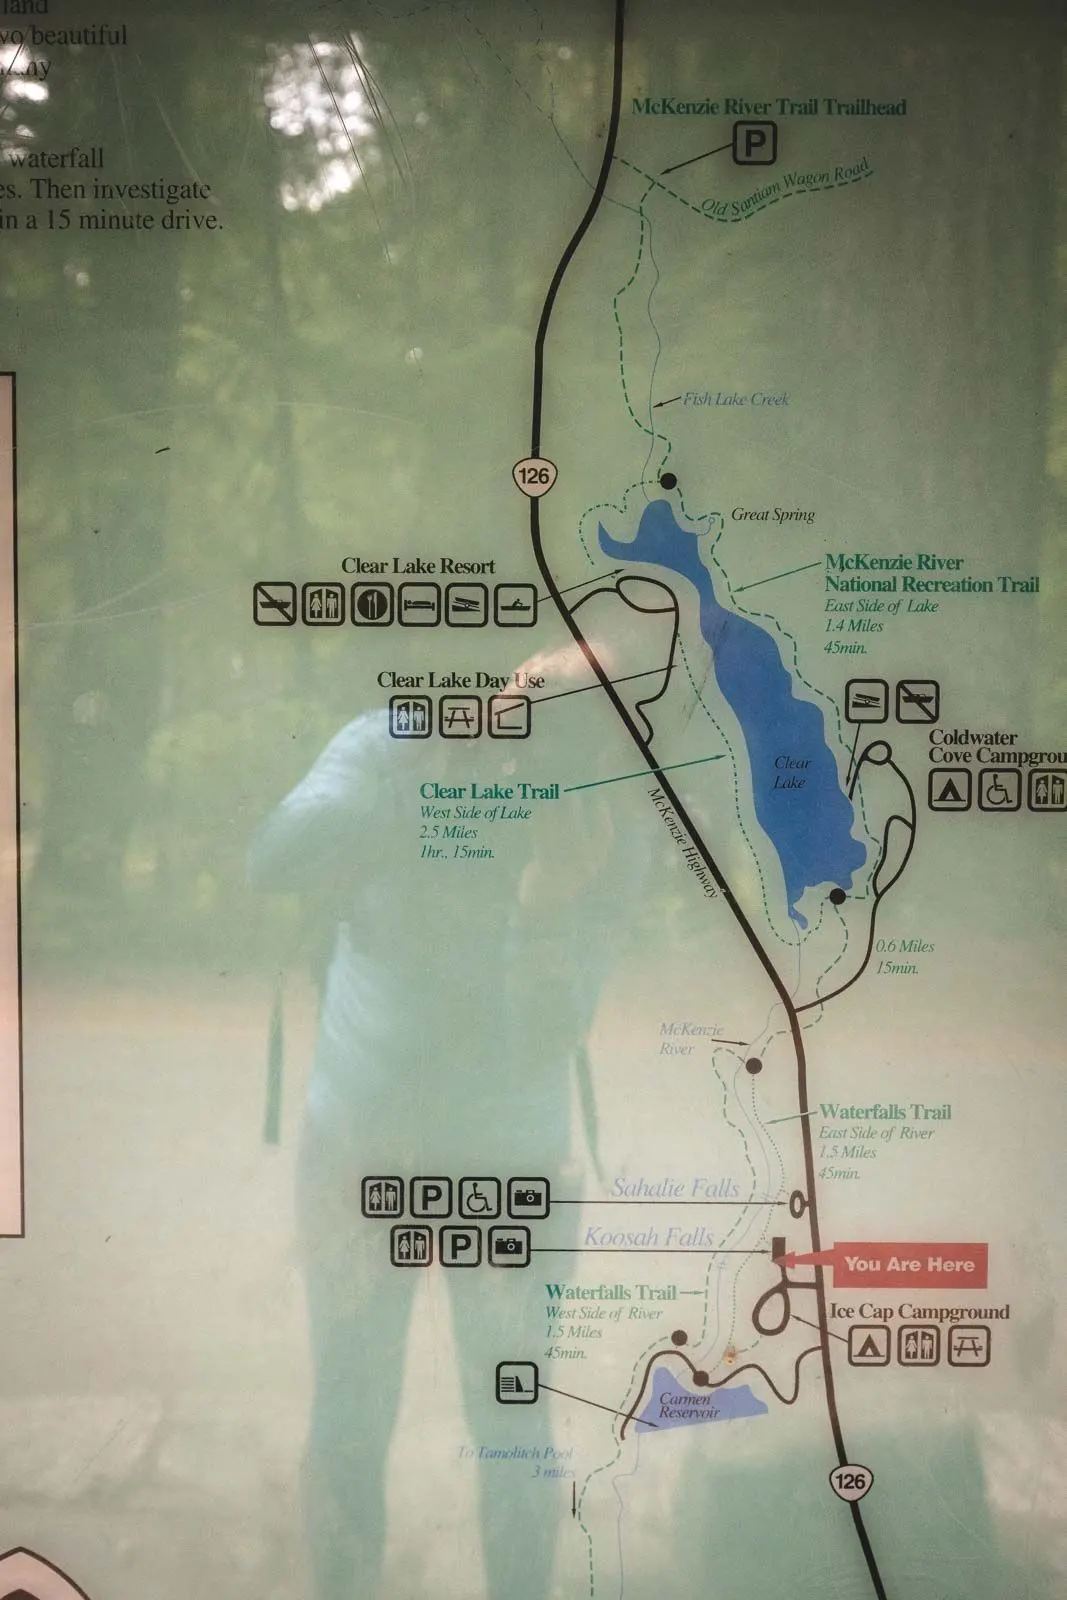 Map for The McKenzie River Trail with reflection of person